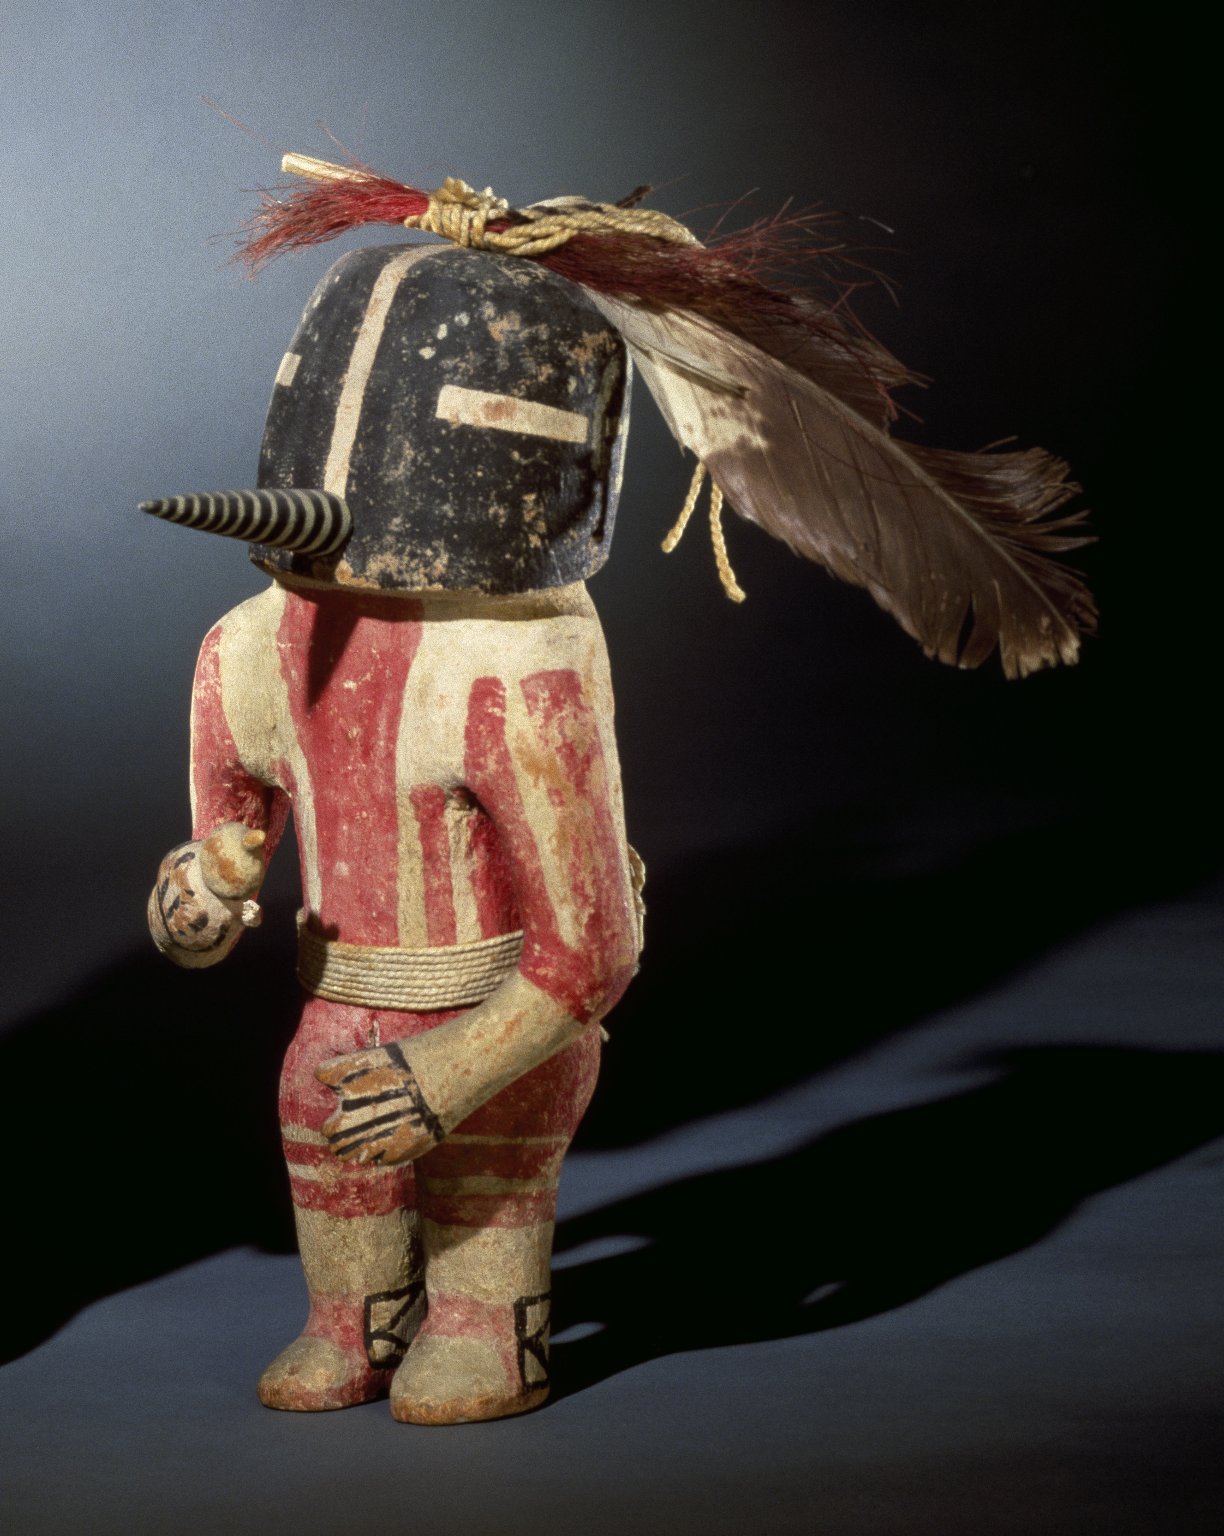 Kachina doll with feathers on its head and a painted body to represent a person